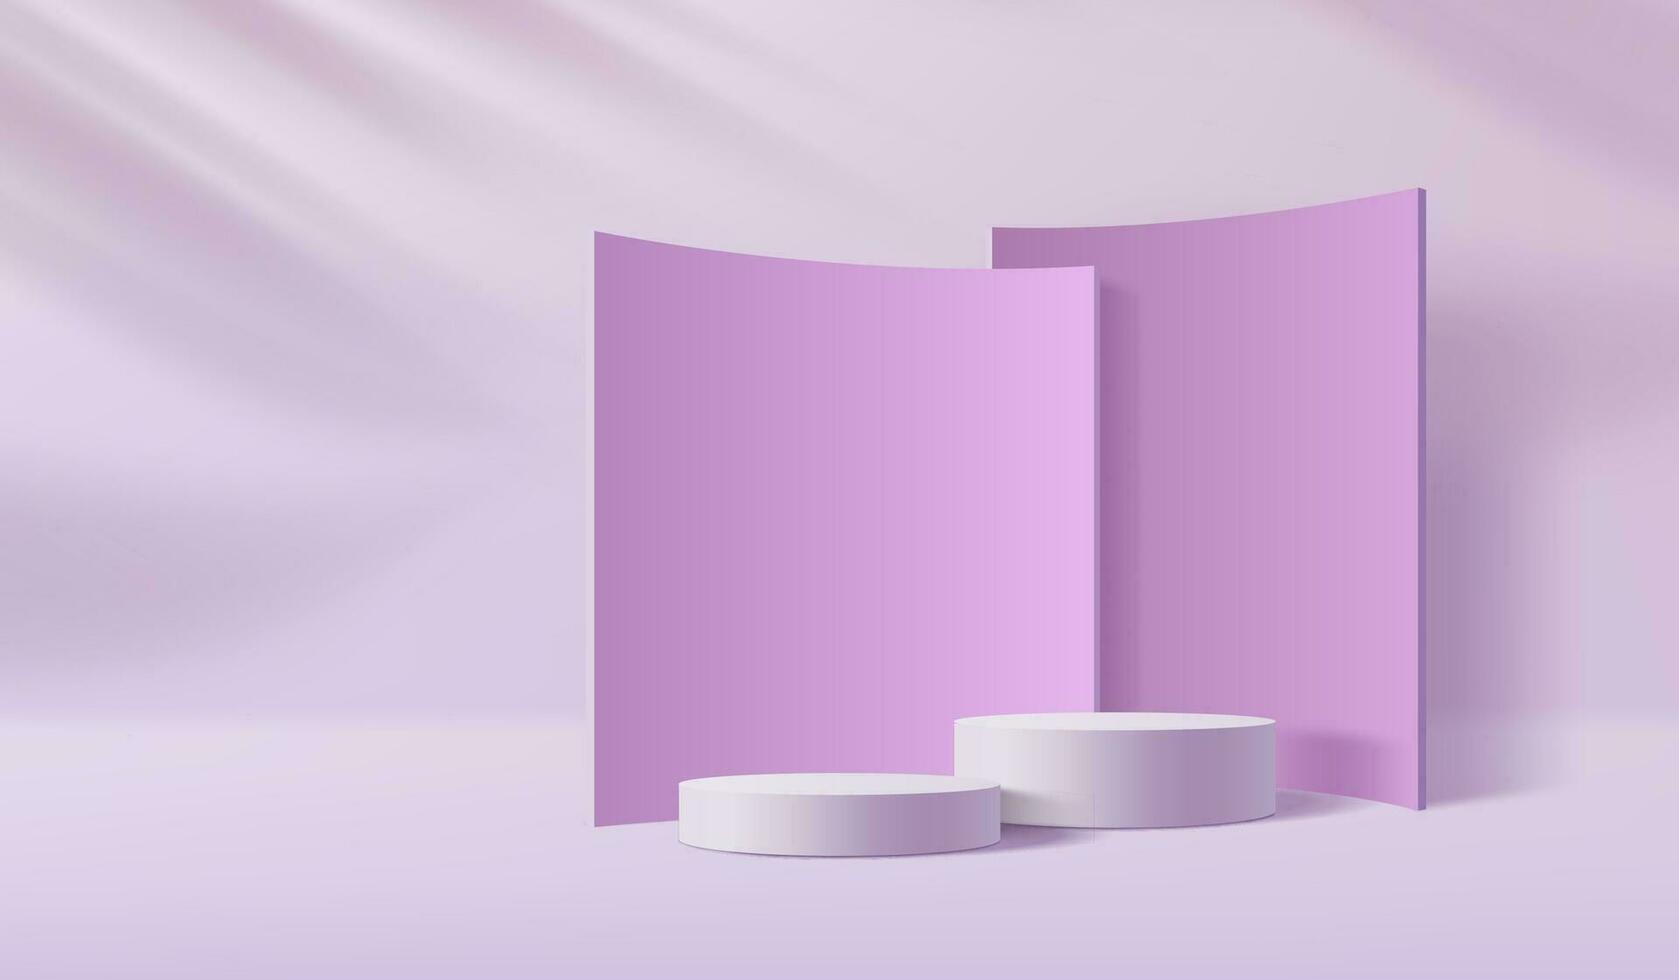 Purple cosmetics podium with wall and shadows vector